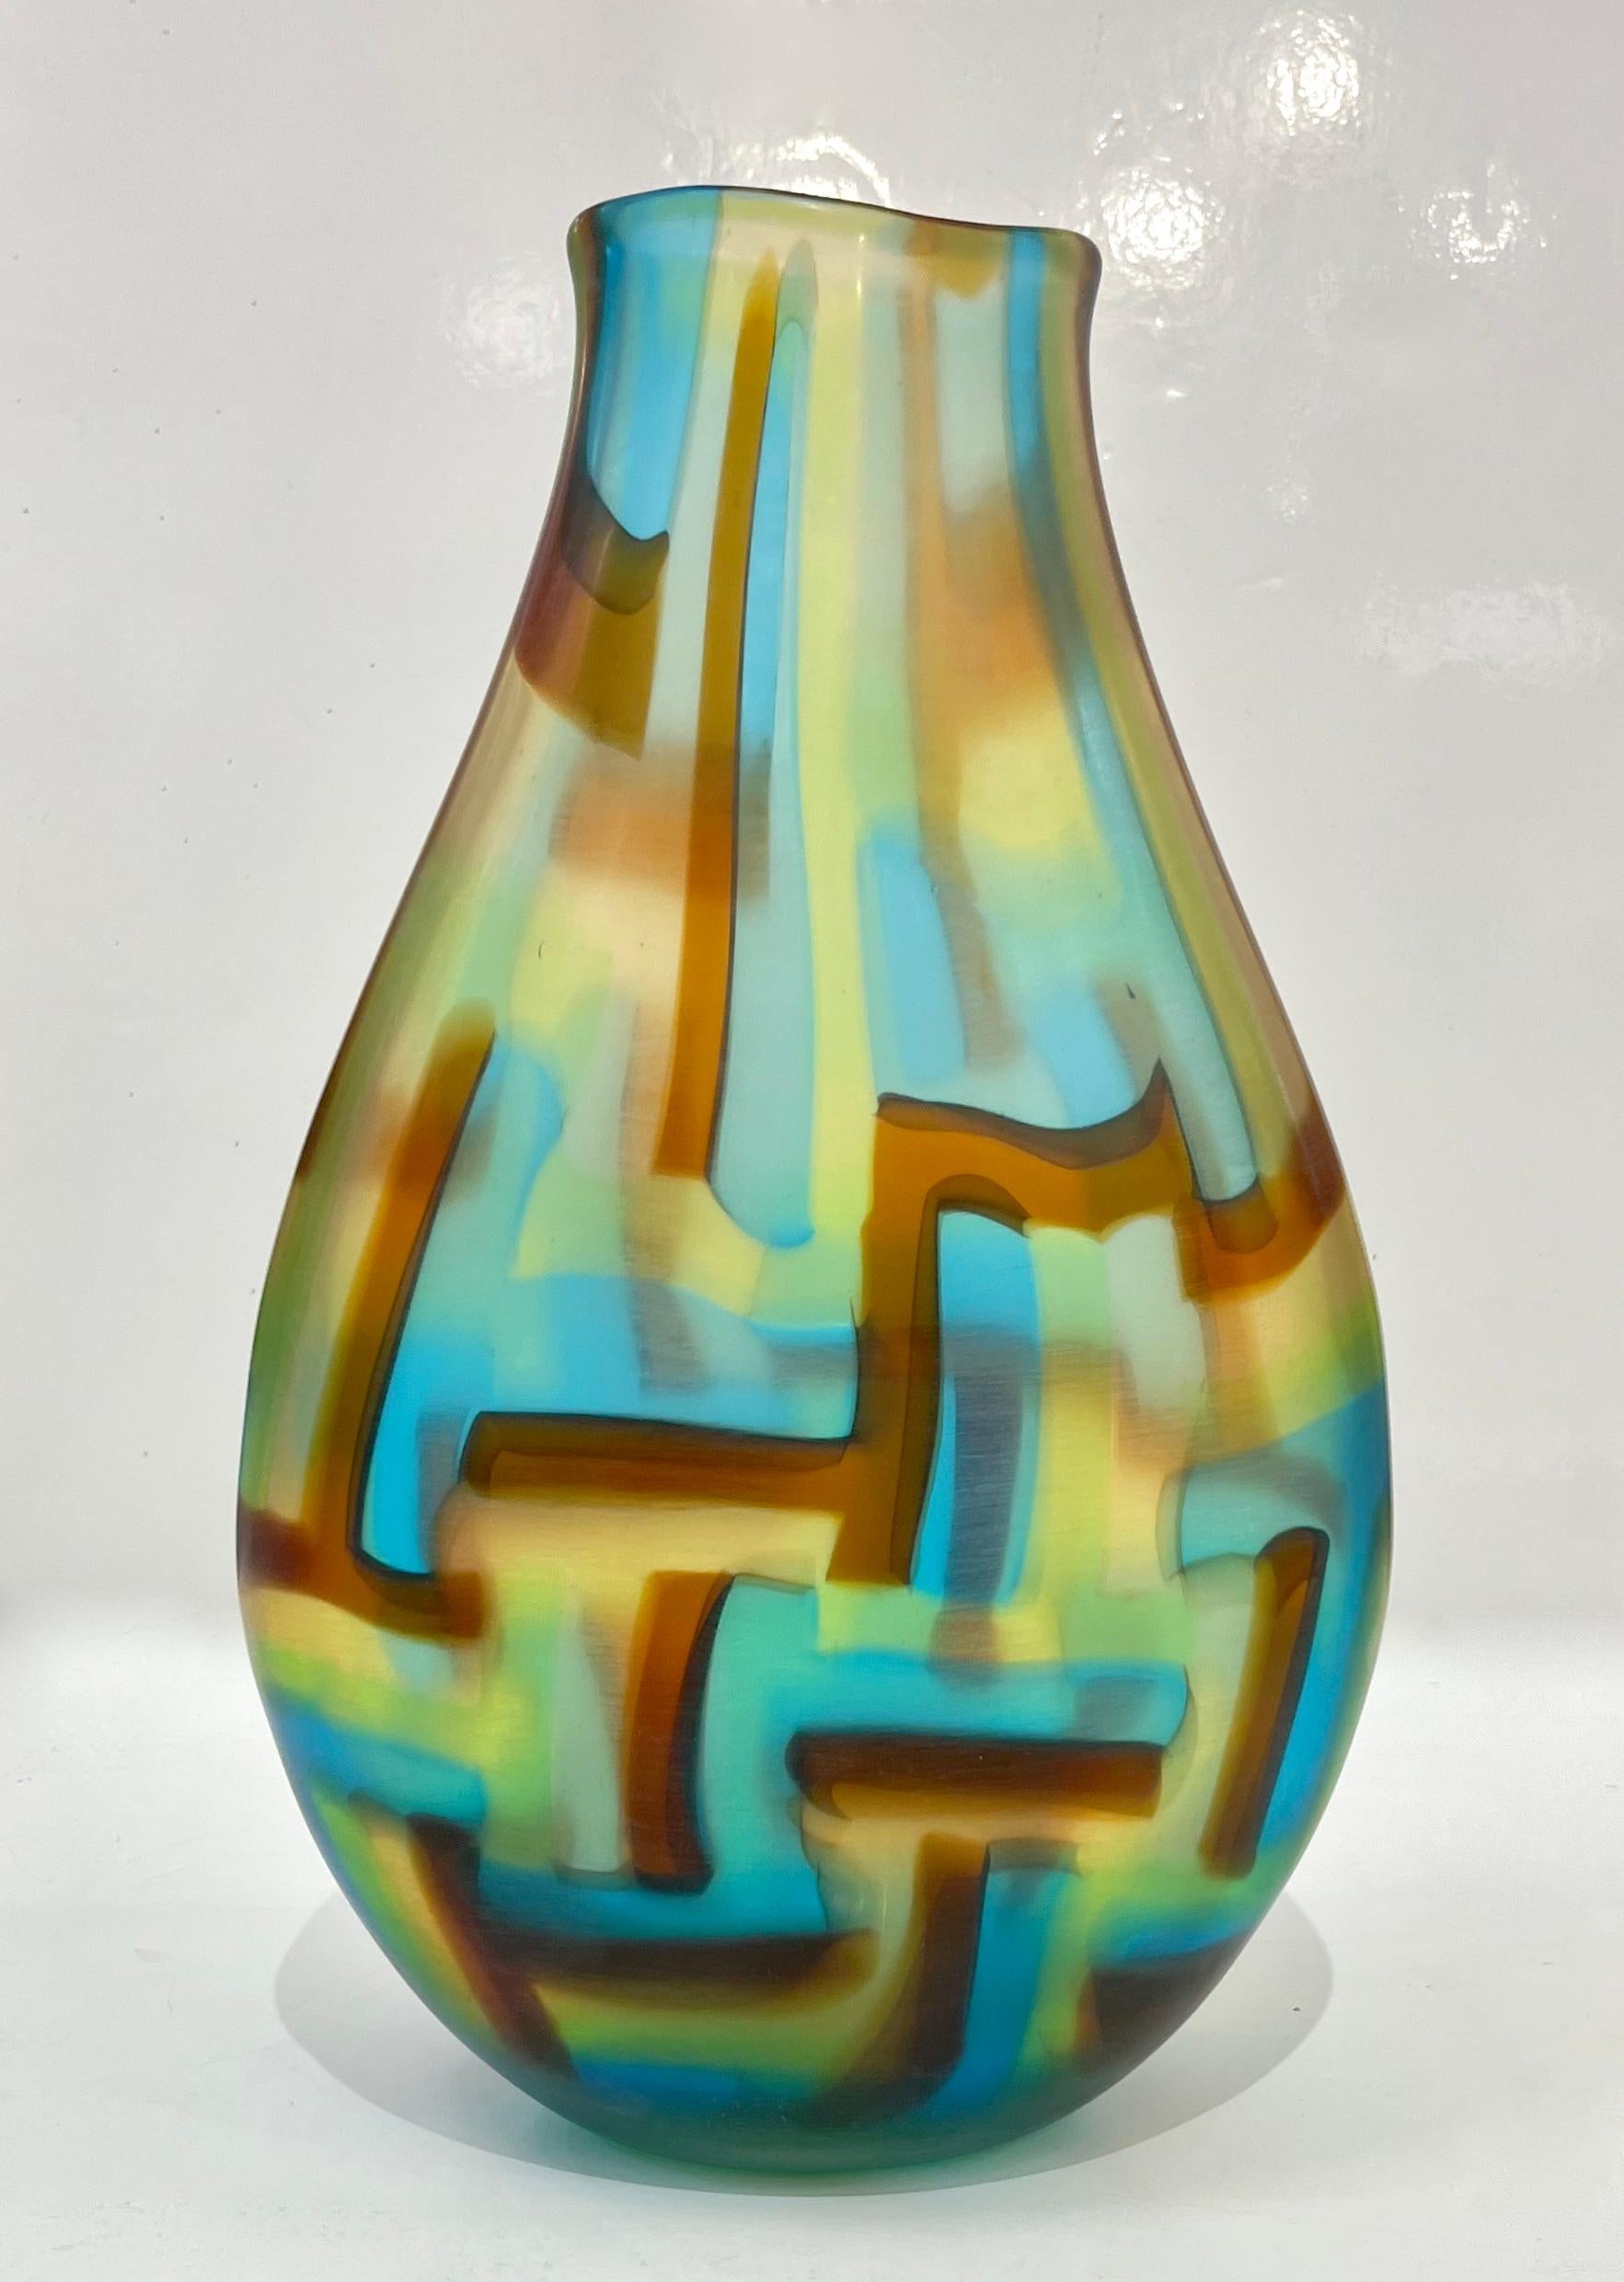 Afro Celotto Early 2000s Italian Turquoise Yellow Green Amber Murano Glass Vase For Sale 3